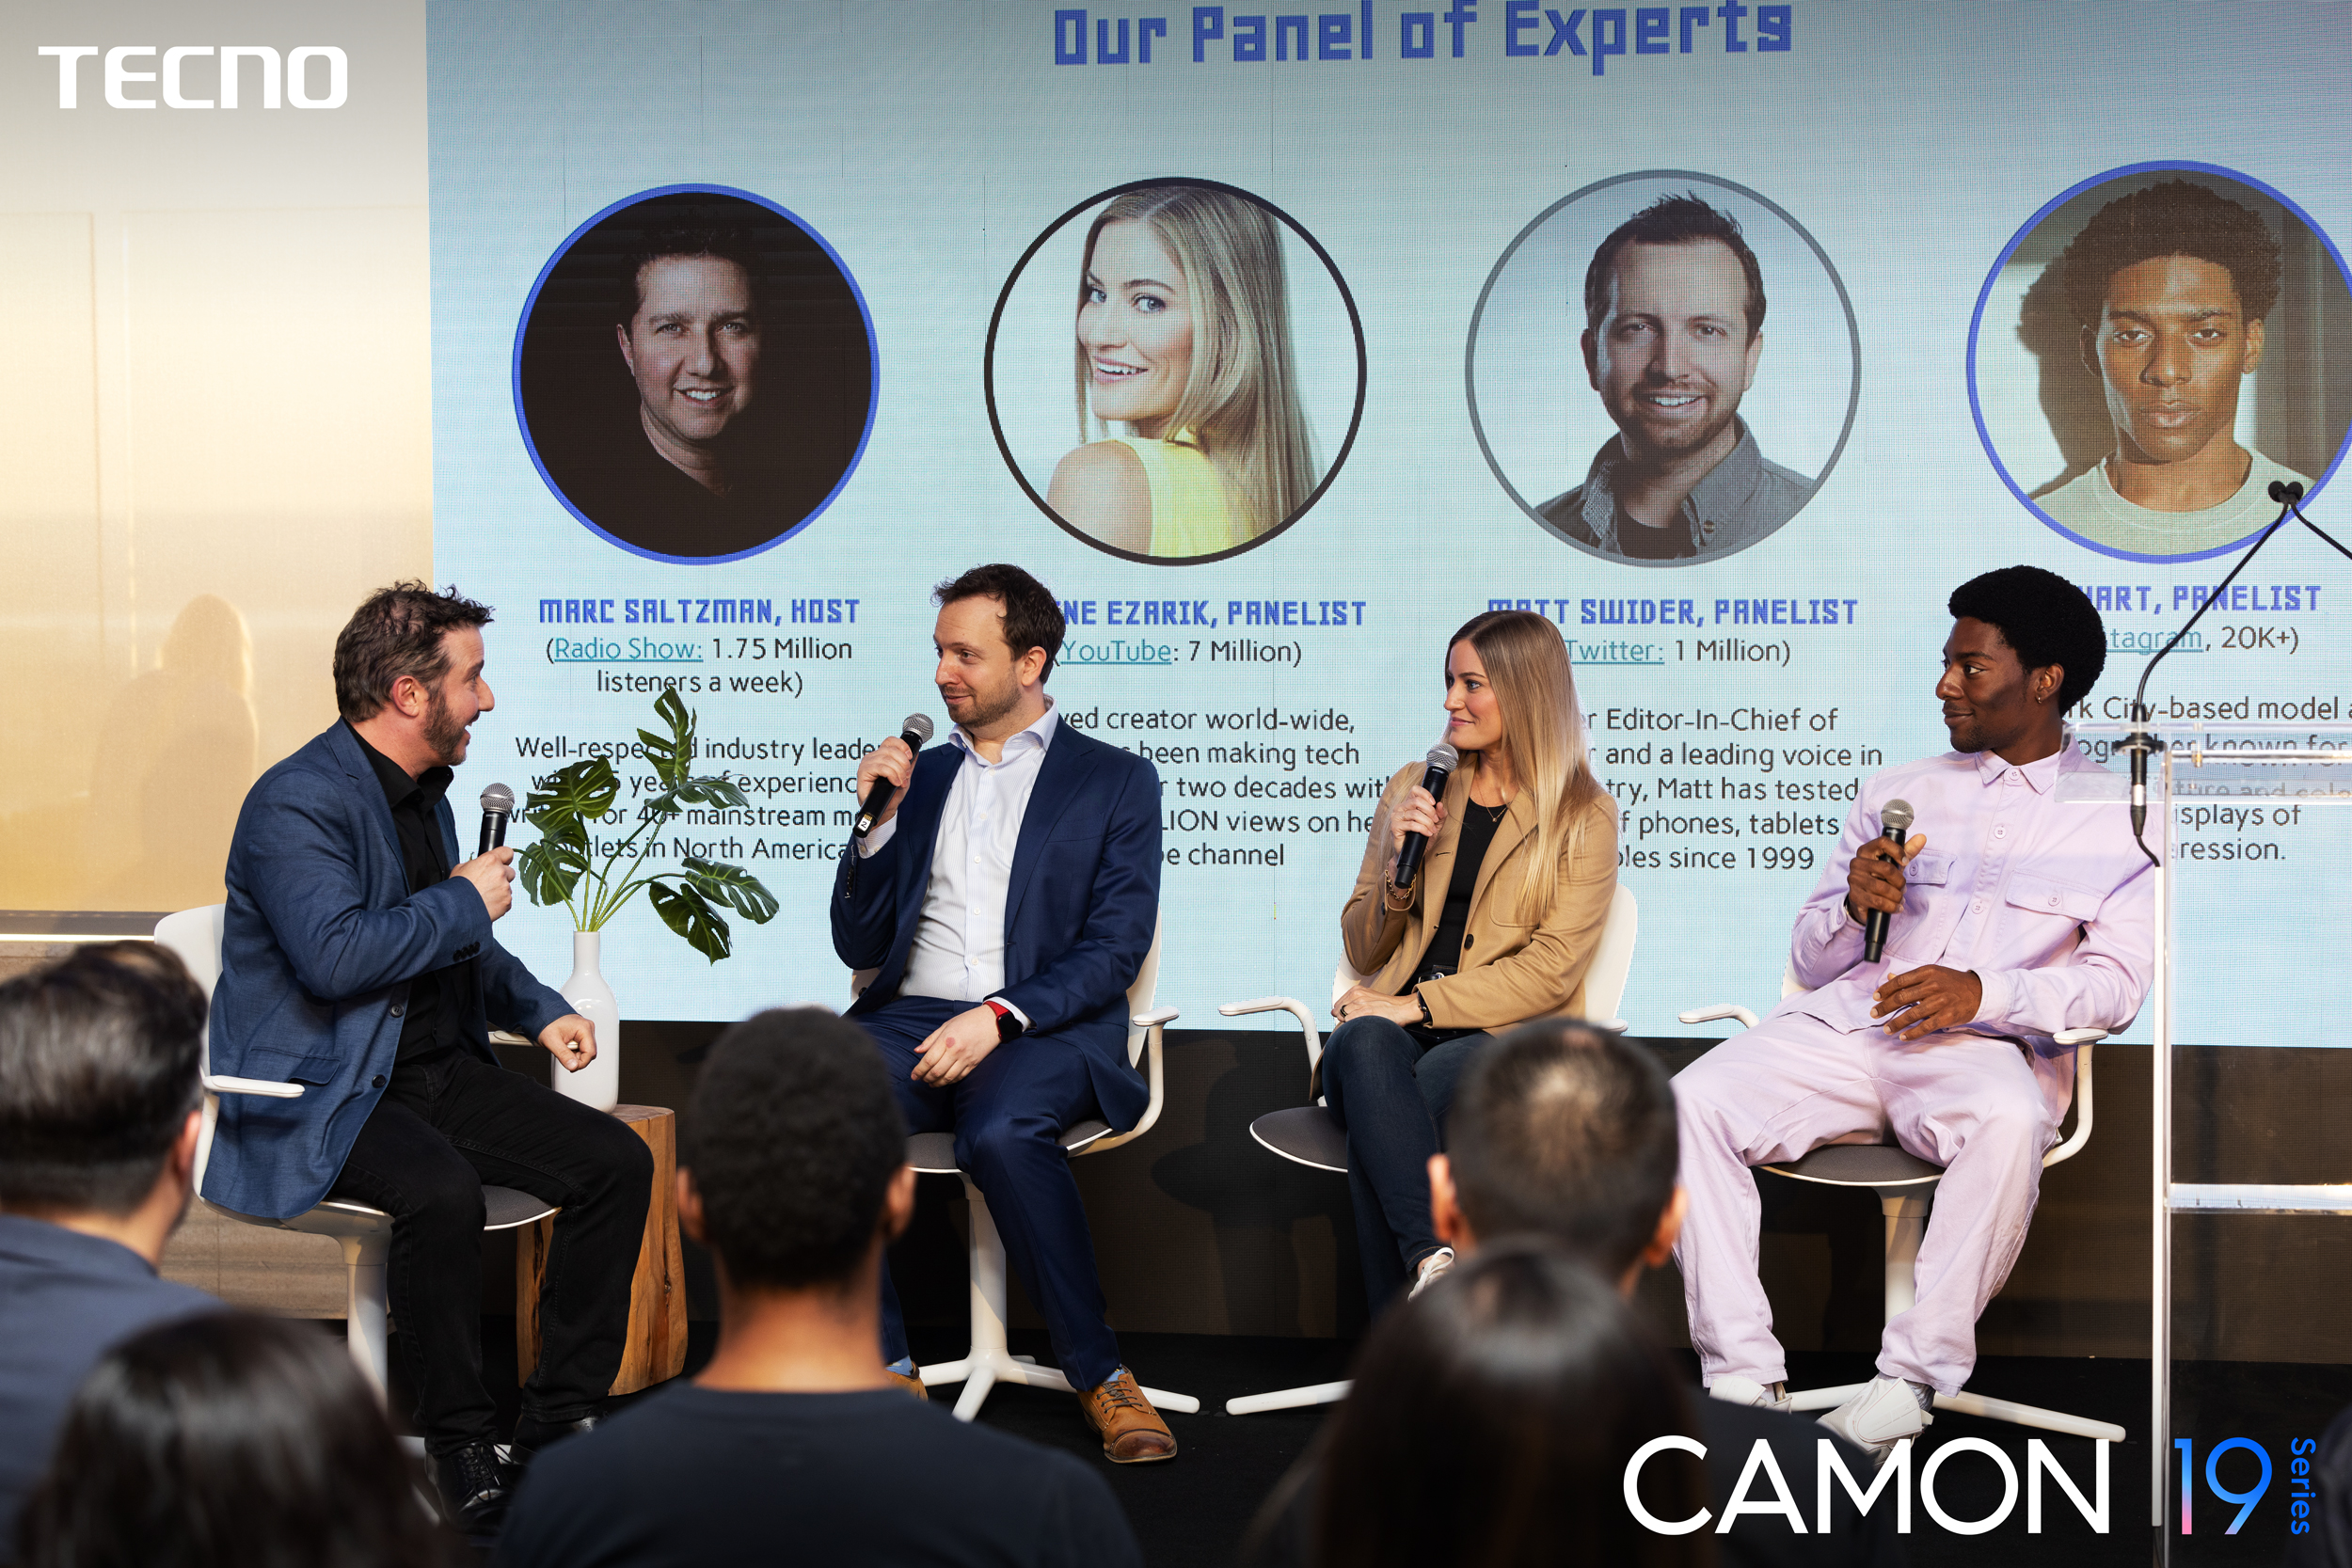 TECNO Held the World's Most Stylish Smartphone Launch in New York City with Dazzling Debut of CAMON 19 Series